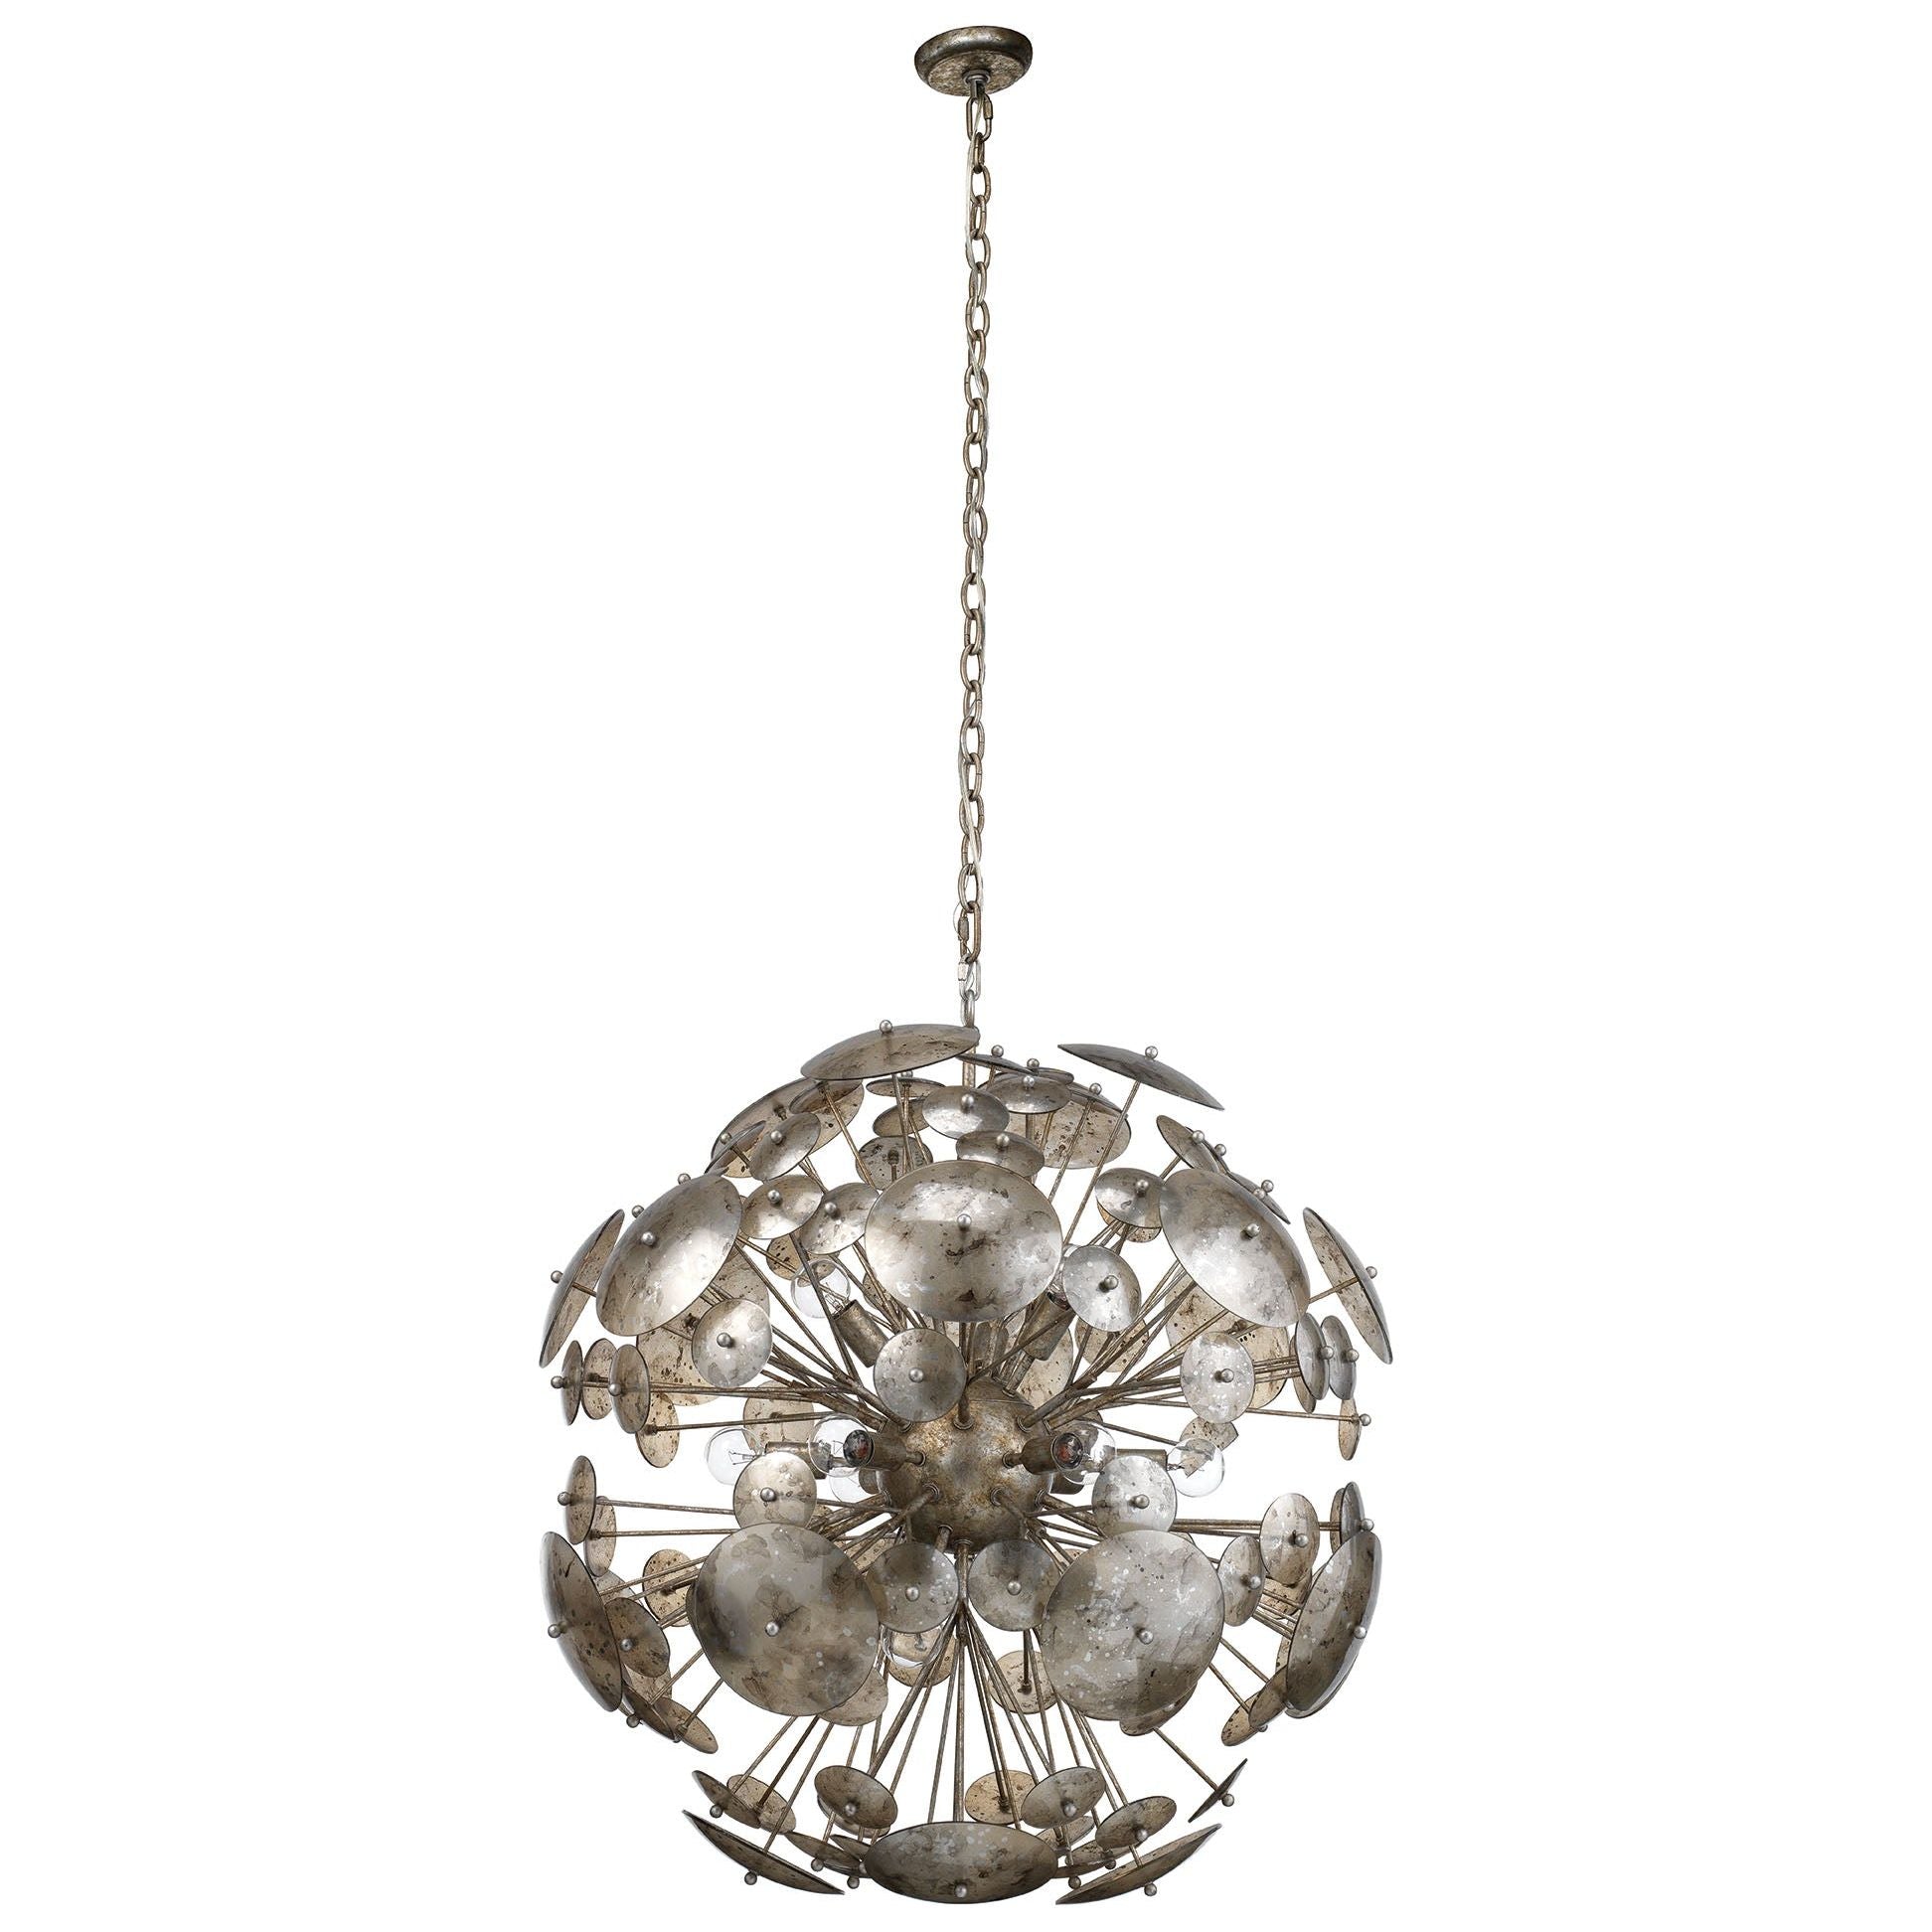 Jamie Young Company - 5CONS-MGCH - Constellation Round Chandelier - Constellation - Champagne